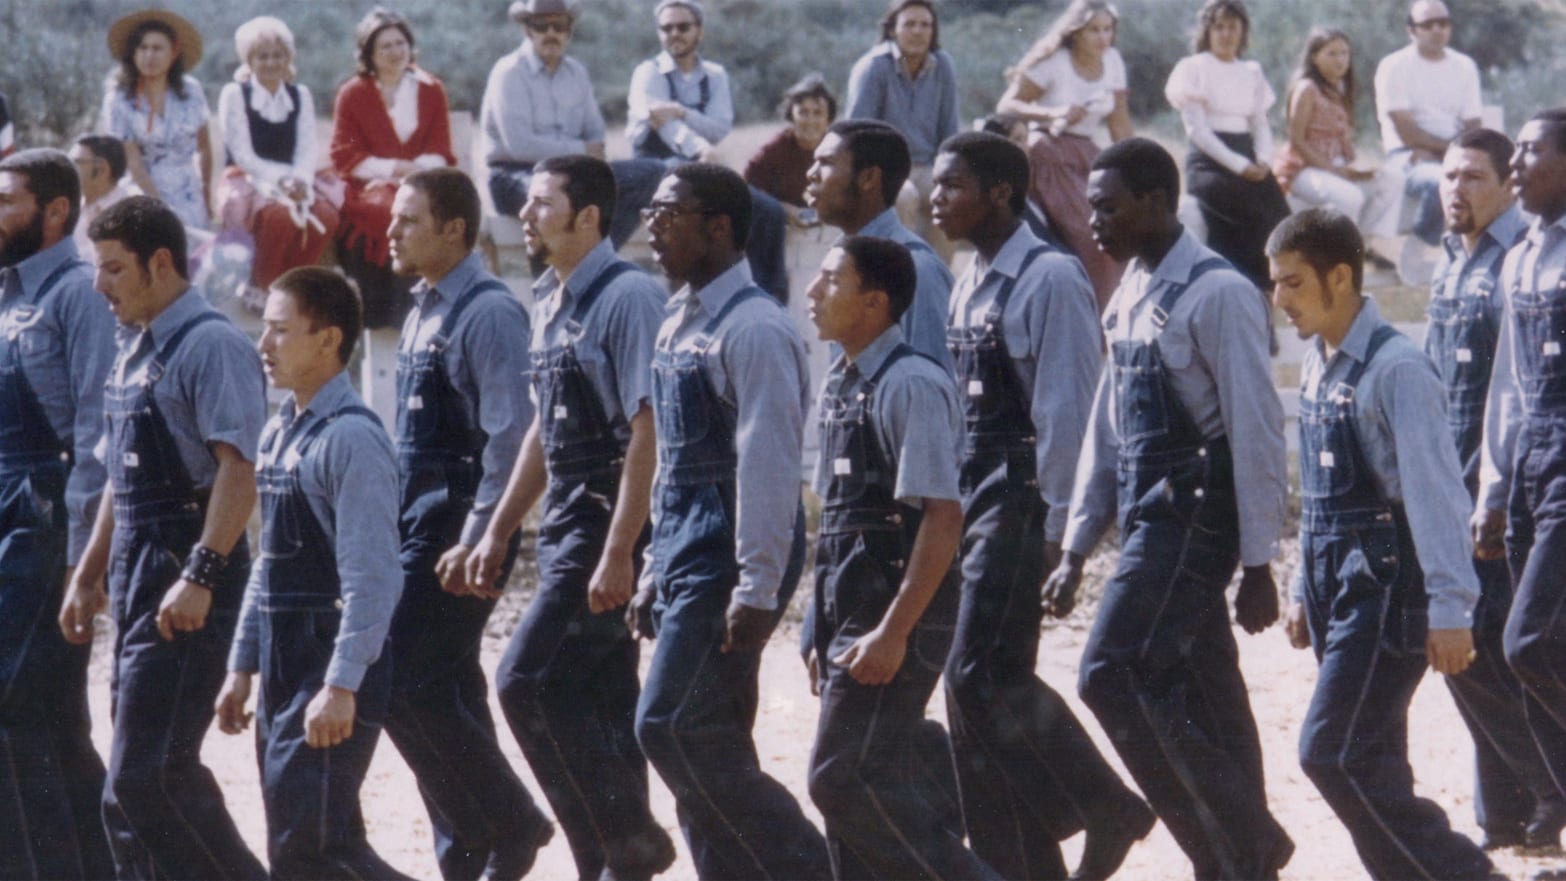 Members of Synanon marching in “Born in Synanon” documentary.